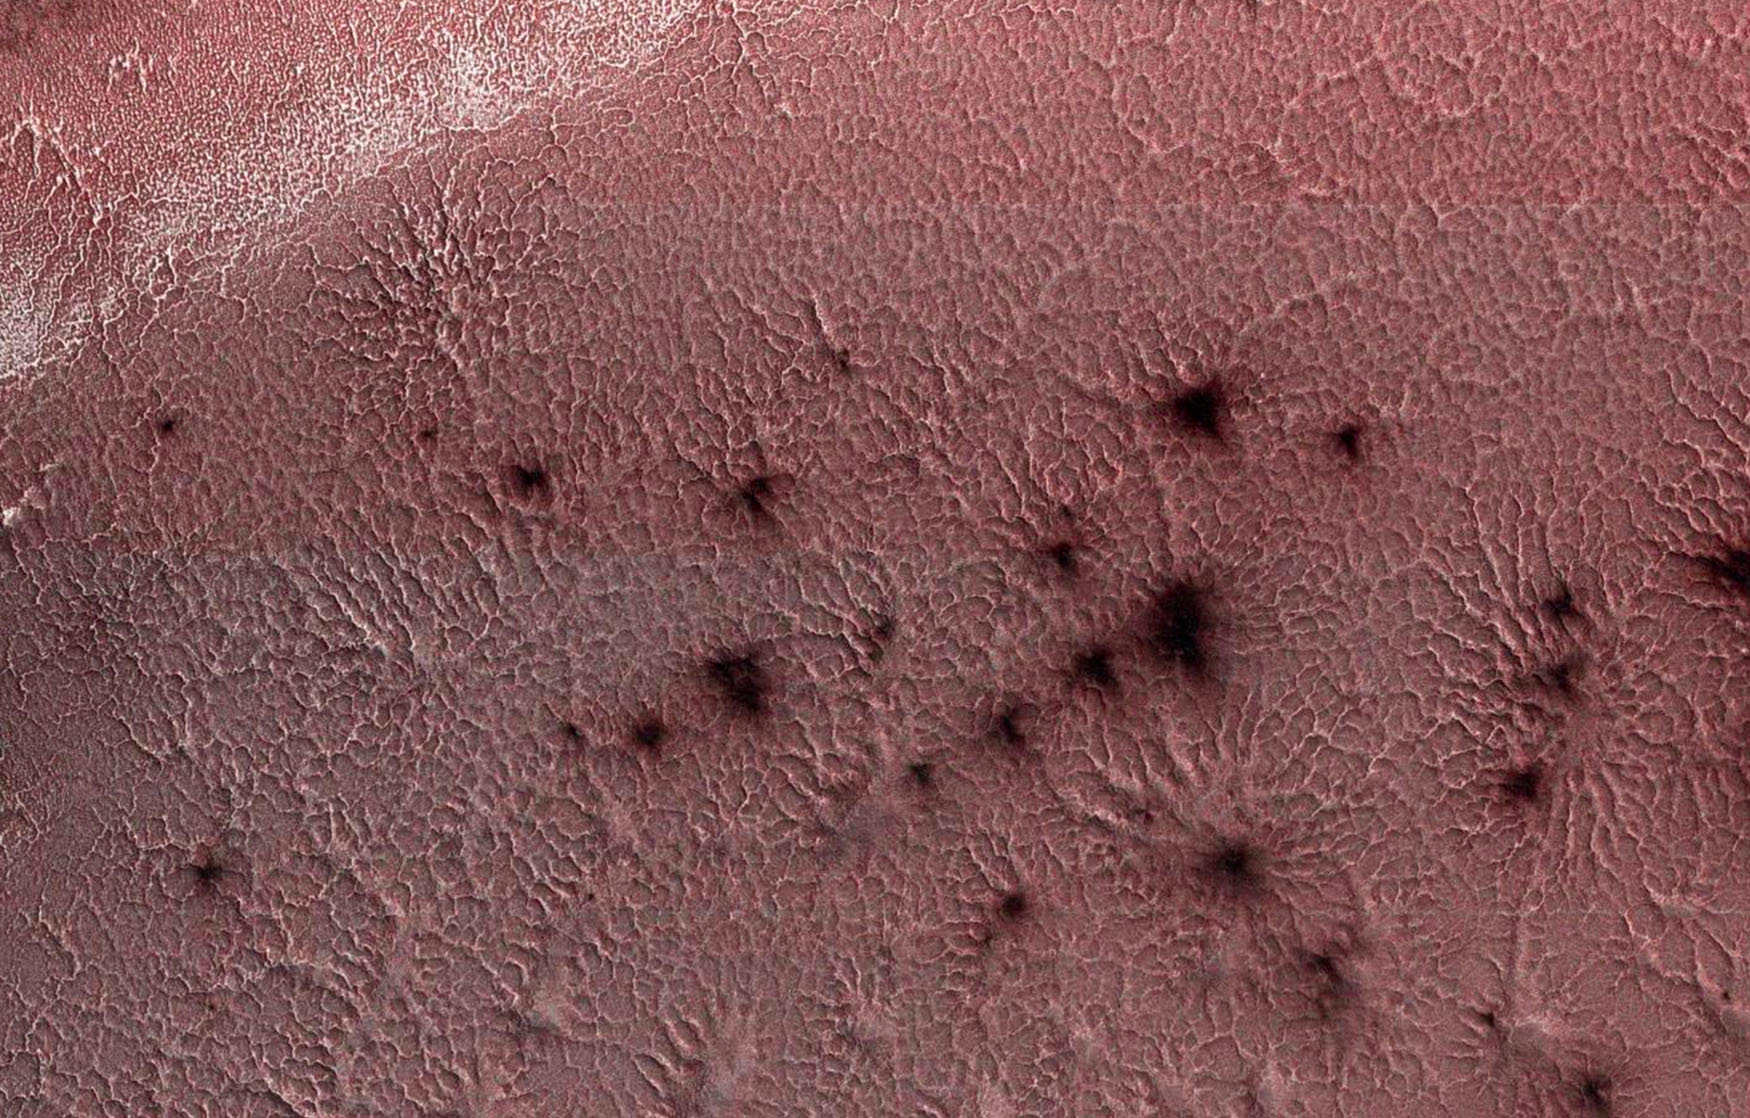 We may finally know why Mars has “spiders” – BGR